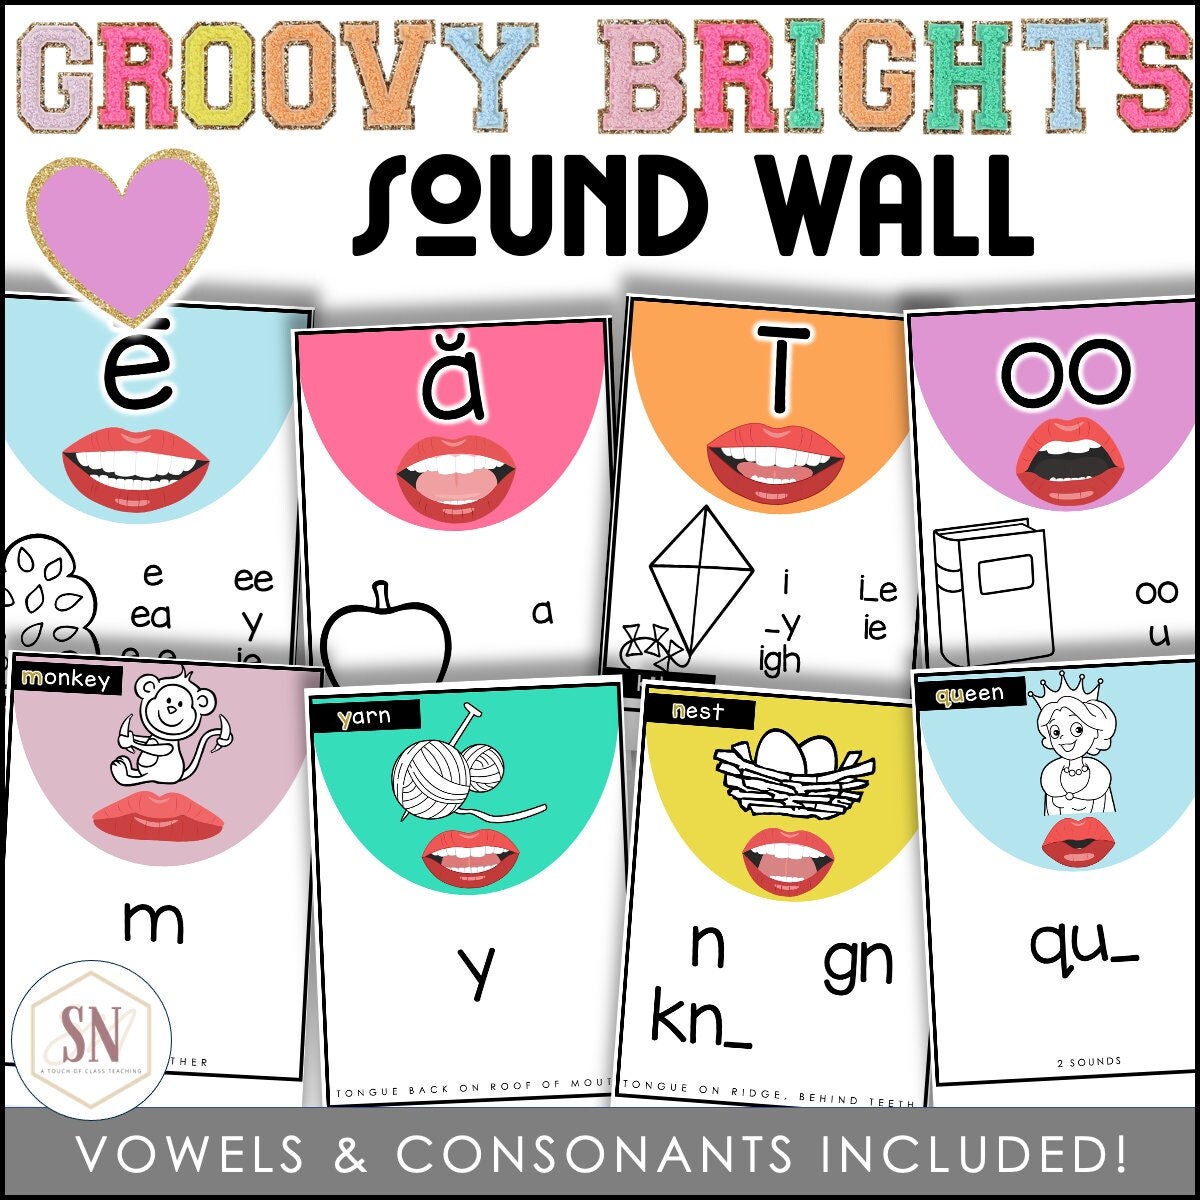 VOWELS ONLY Alphabet Beads, Beads, Letter Beads, DIY, Kid Crafts 